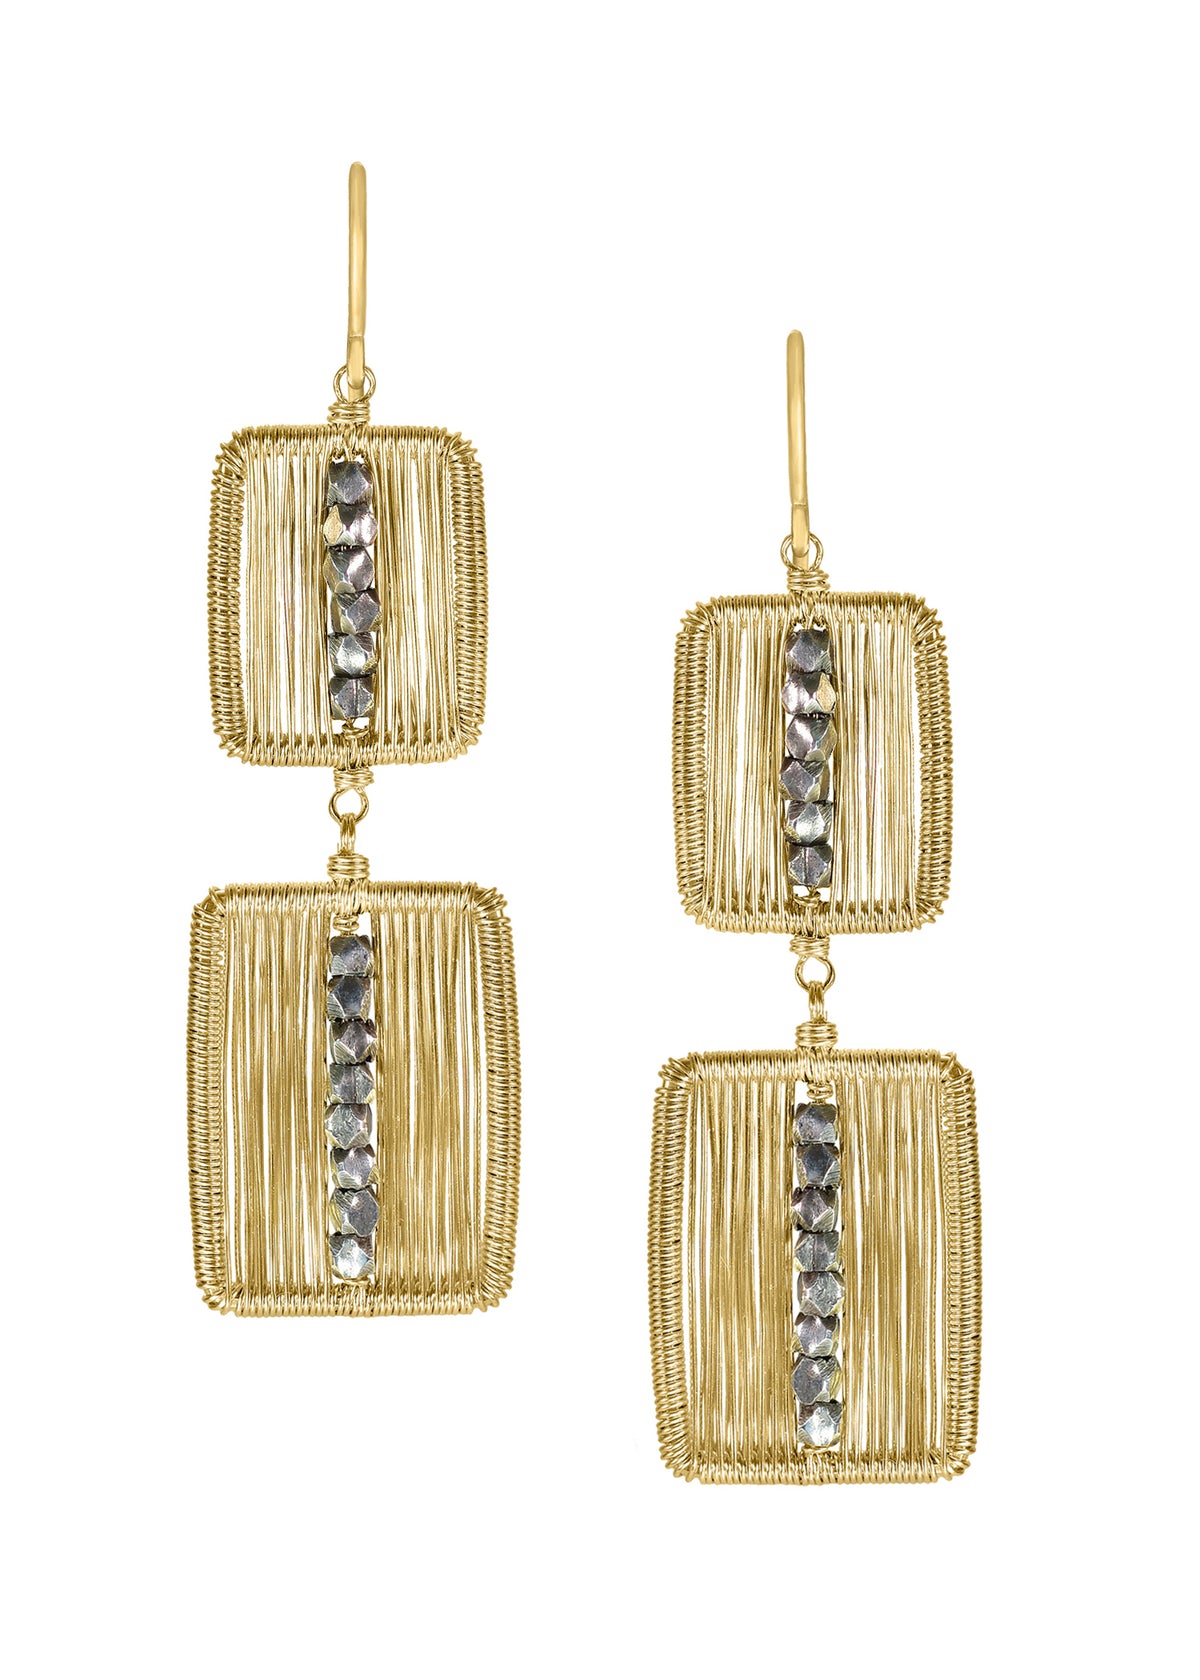 14k gold fill Sterling silver Earrings measure 2&quot; in length (including the ear wires) and 9/16&quot; in width at the widest point Handmade in our Los Angeles studio